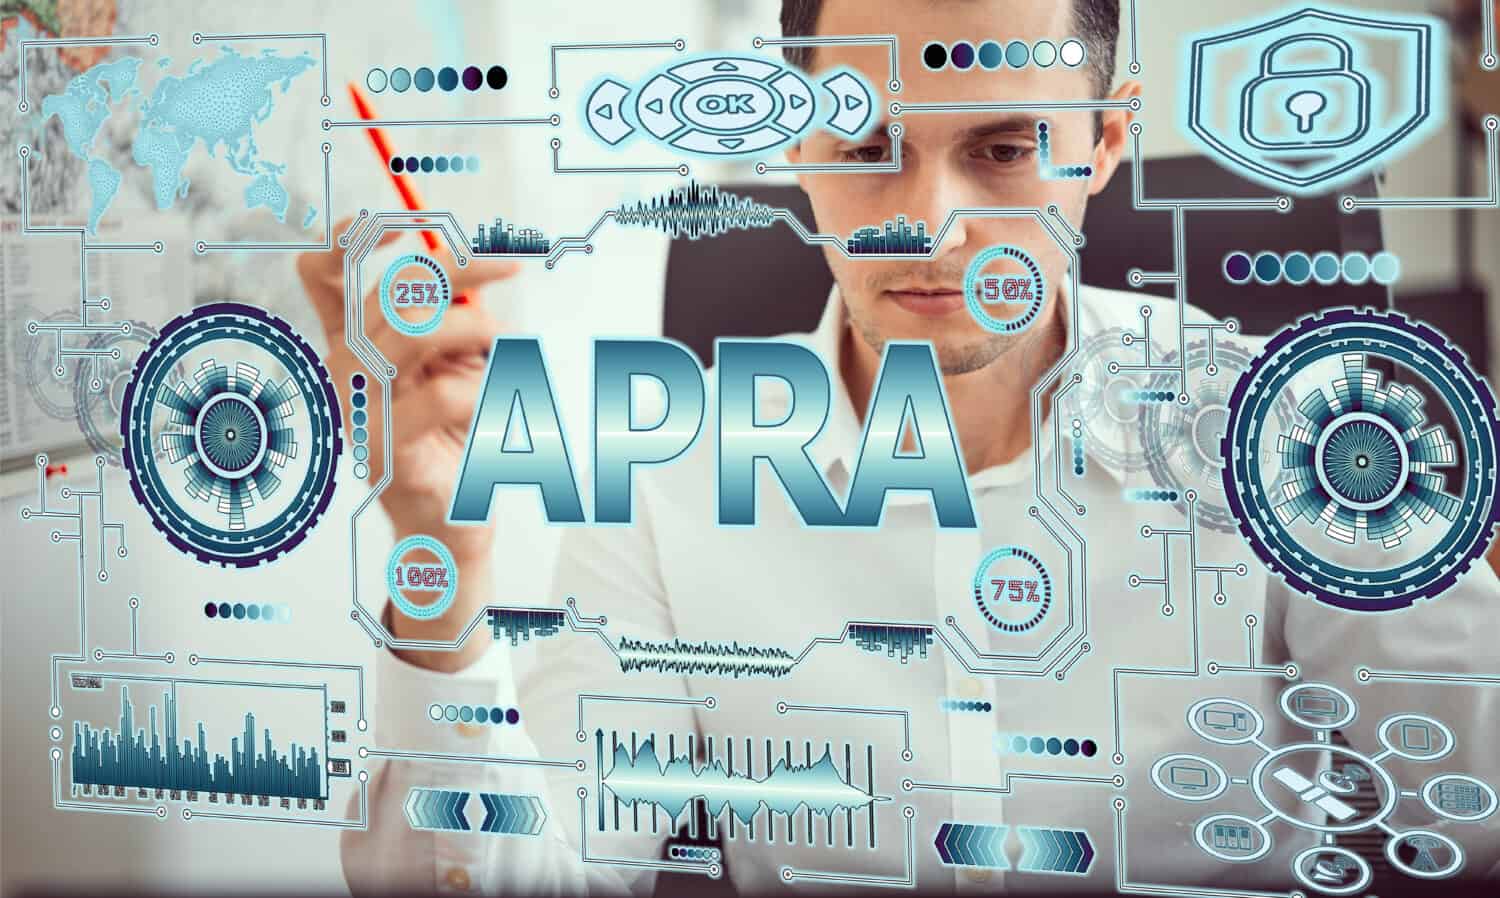 A young businessman uses a futuristic laptop with the latest holographic technology augmented reality with the inscription "ARPA" 